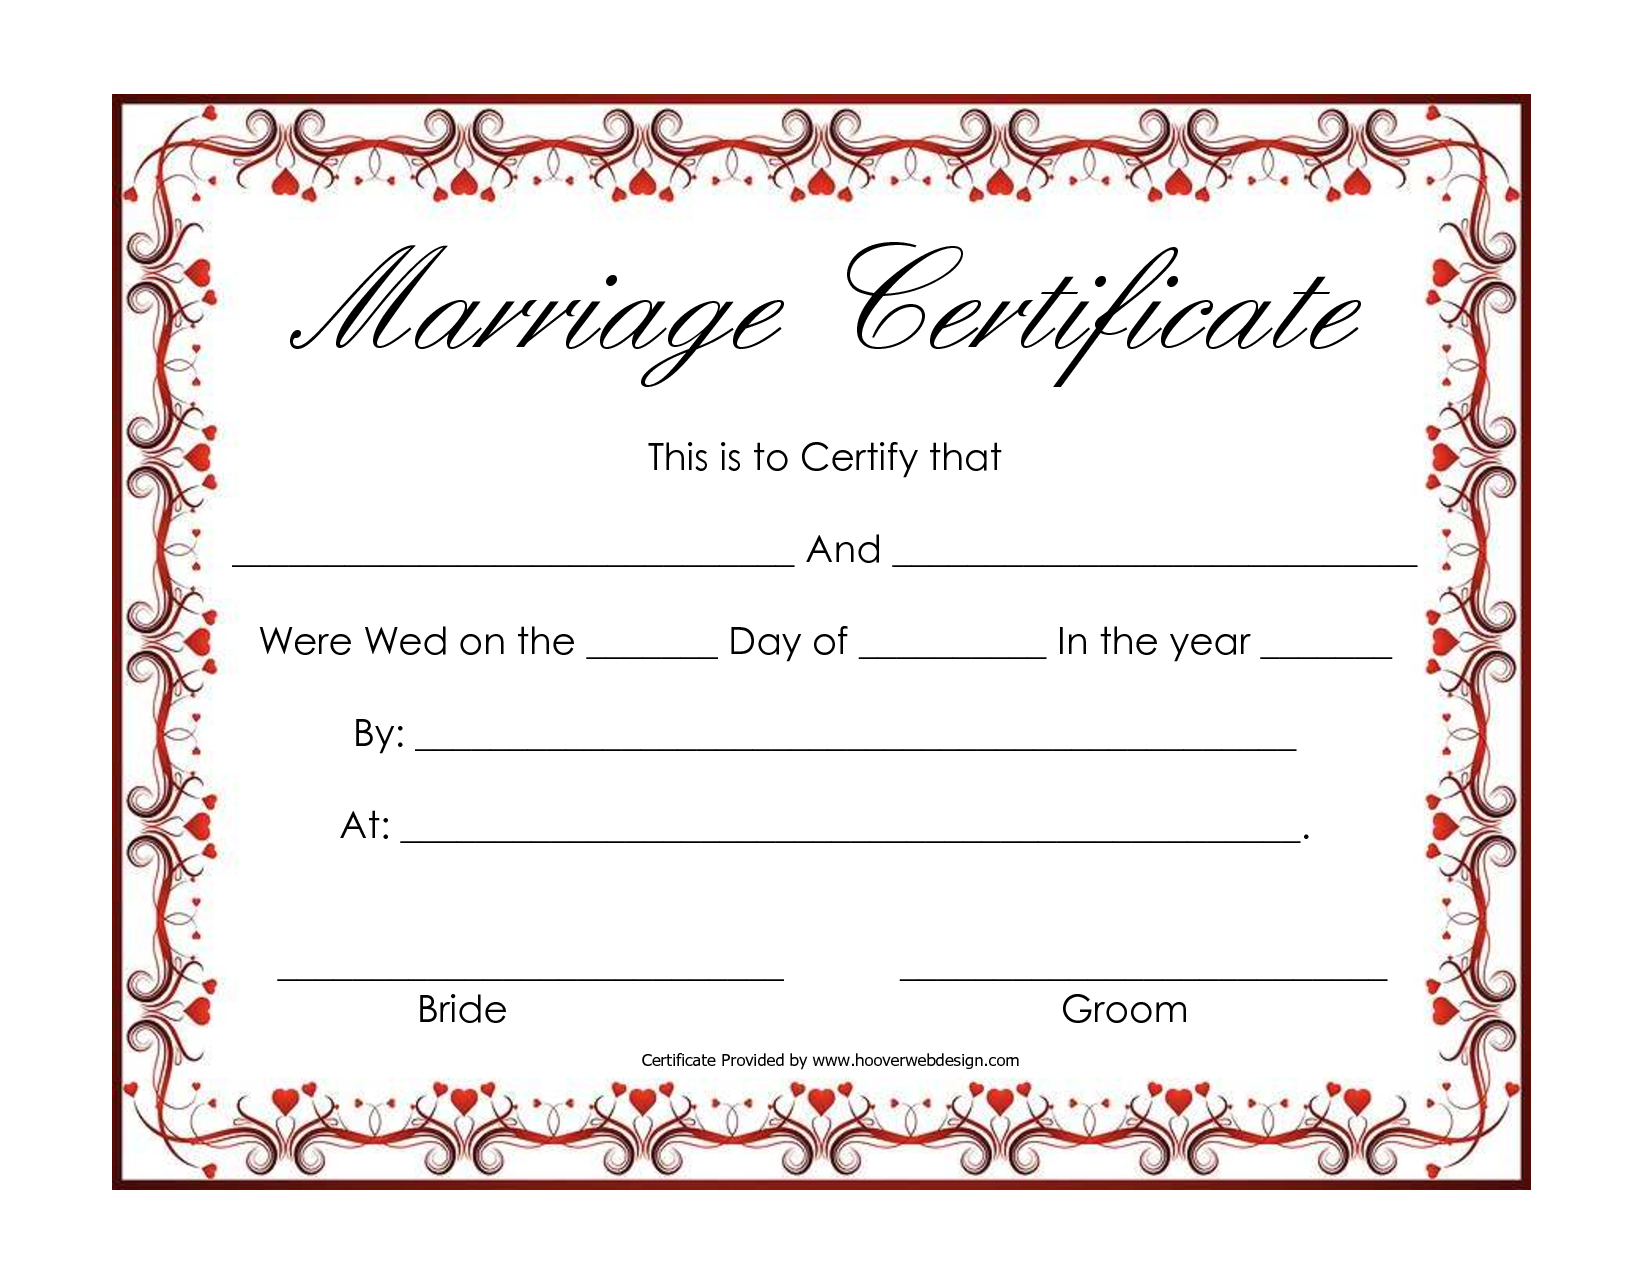 Antique Certificate Of Marriage Printable Via Knickoftime Free